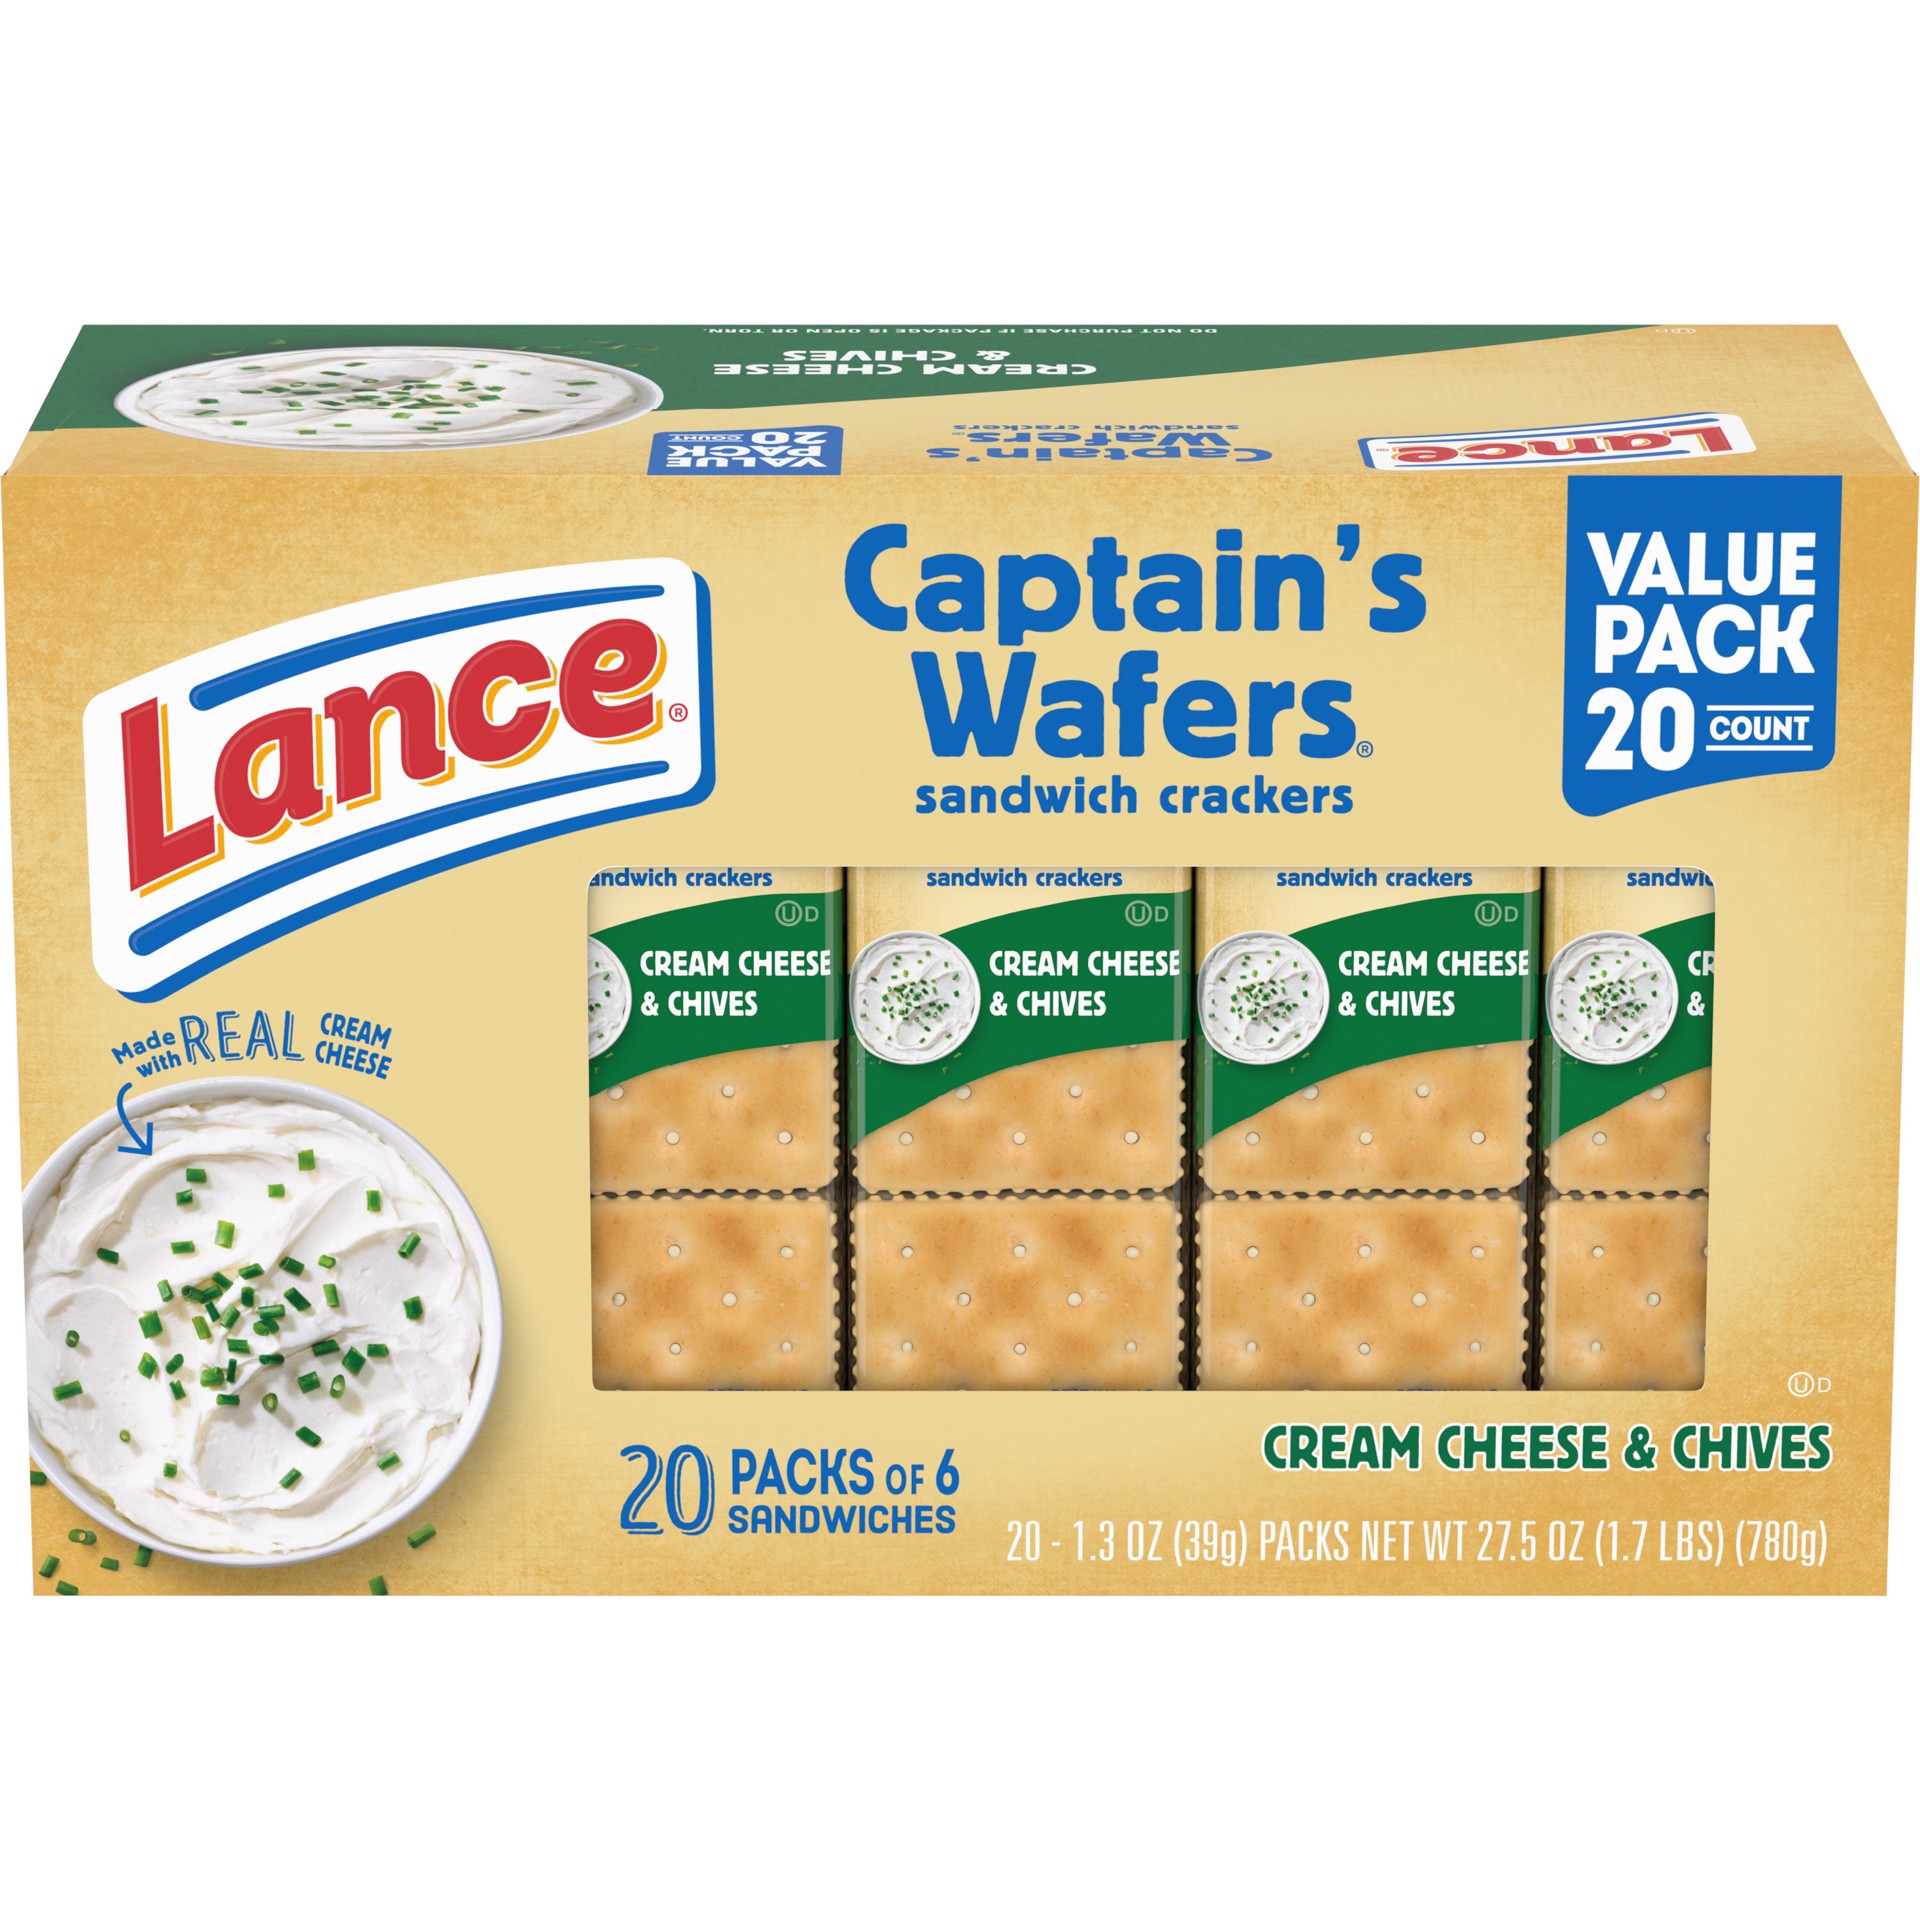 slide 1 of 10, Lance Sandwich Crackers, Captain's Wafers Cream Cheese and Chives, 20 Packs, 6 Sandwiches Each, 27.5 oz